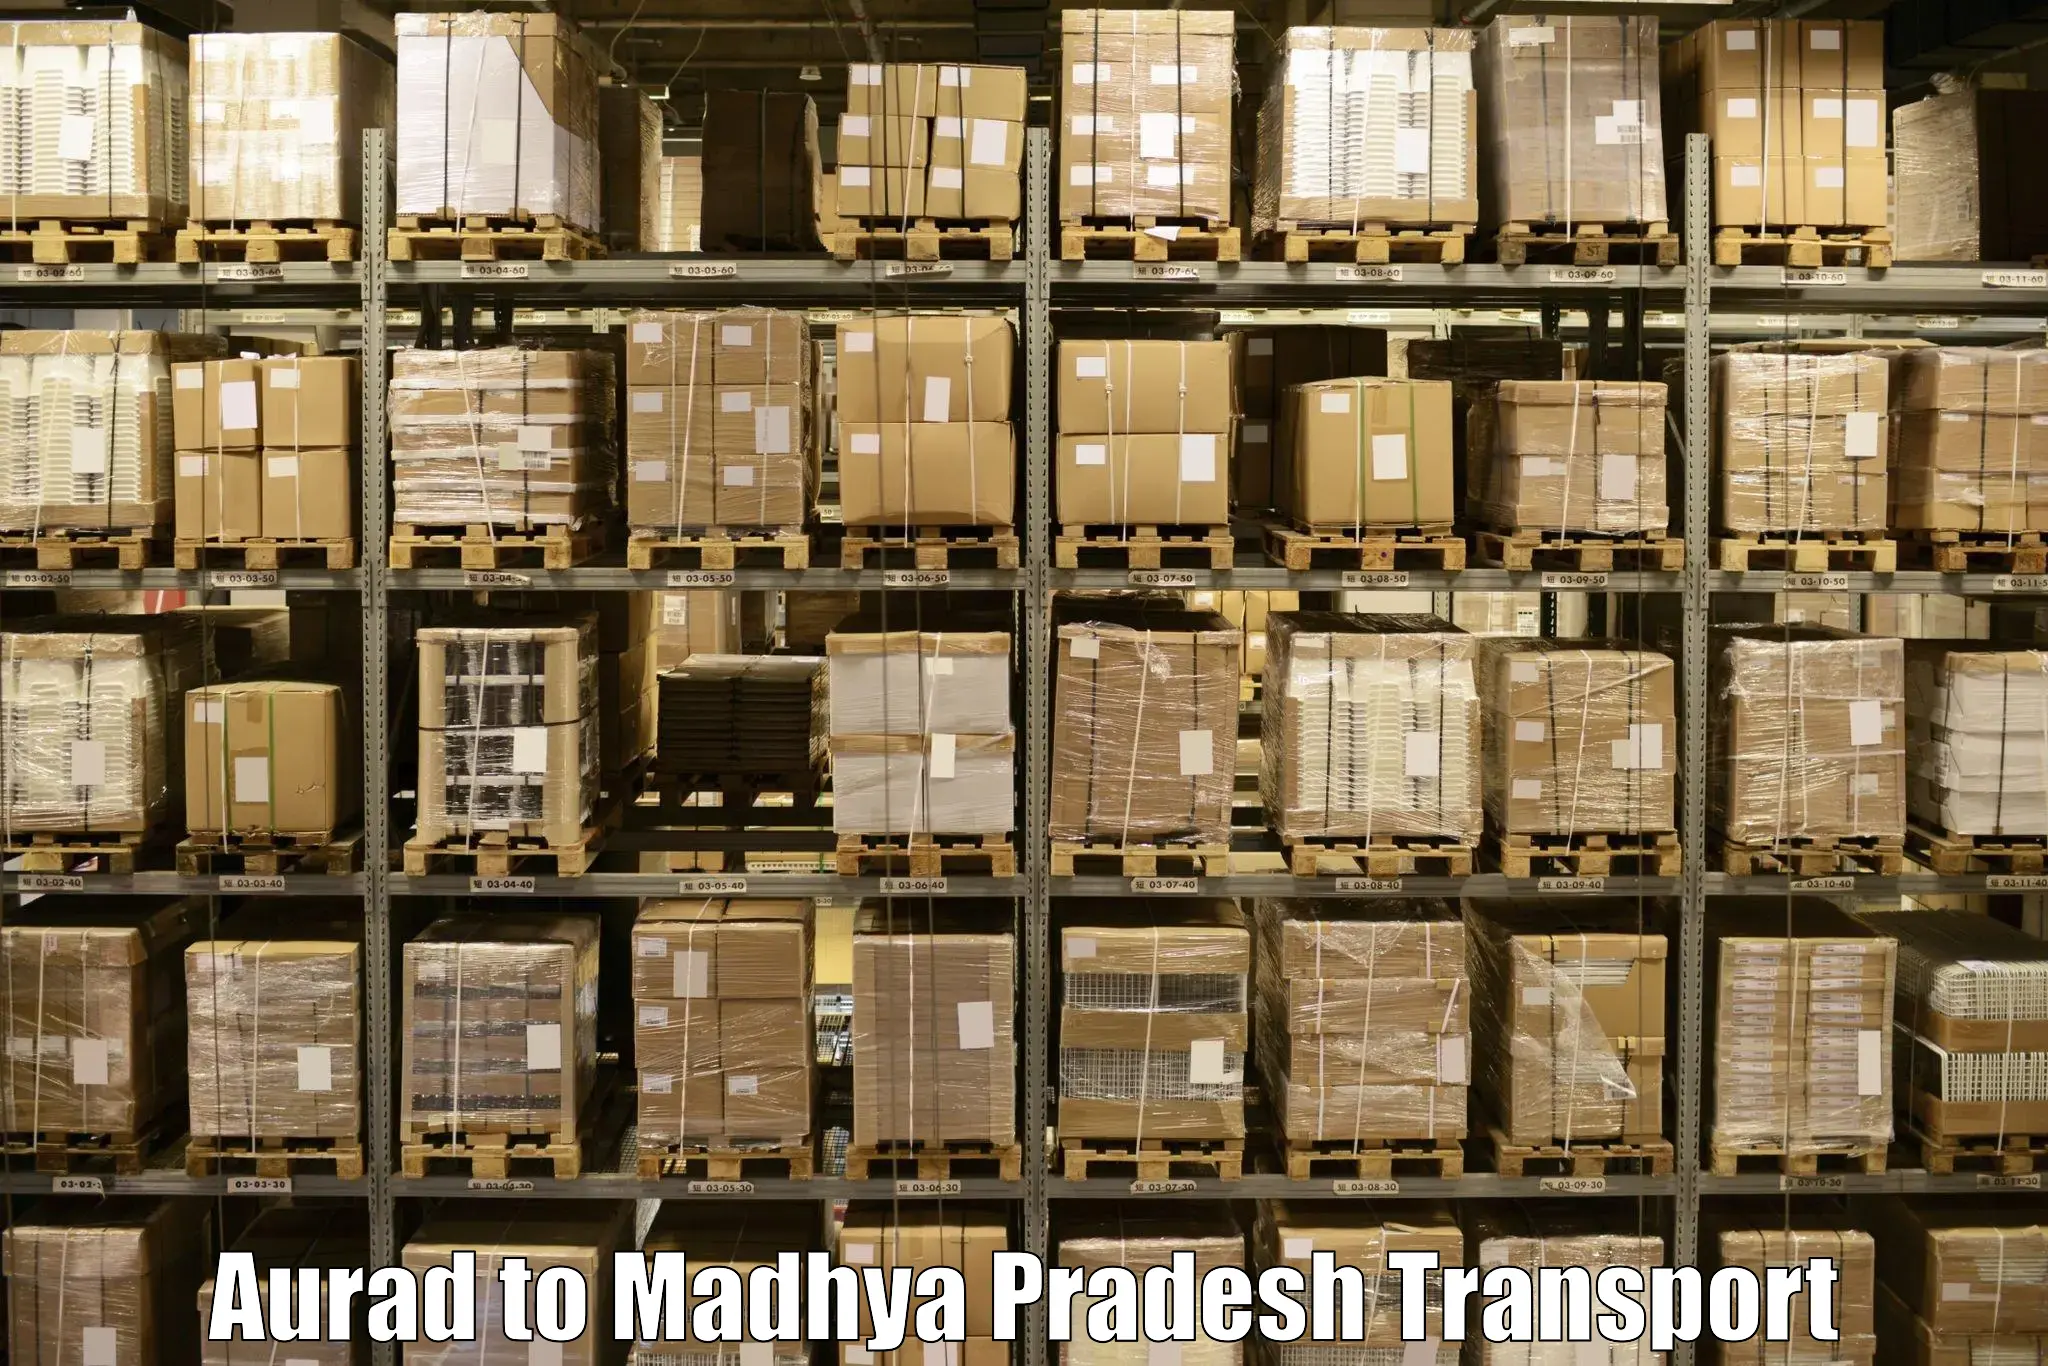 Truck transport companies in India Aurad to Bhopal